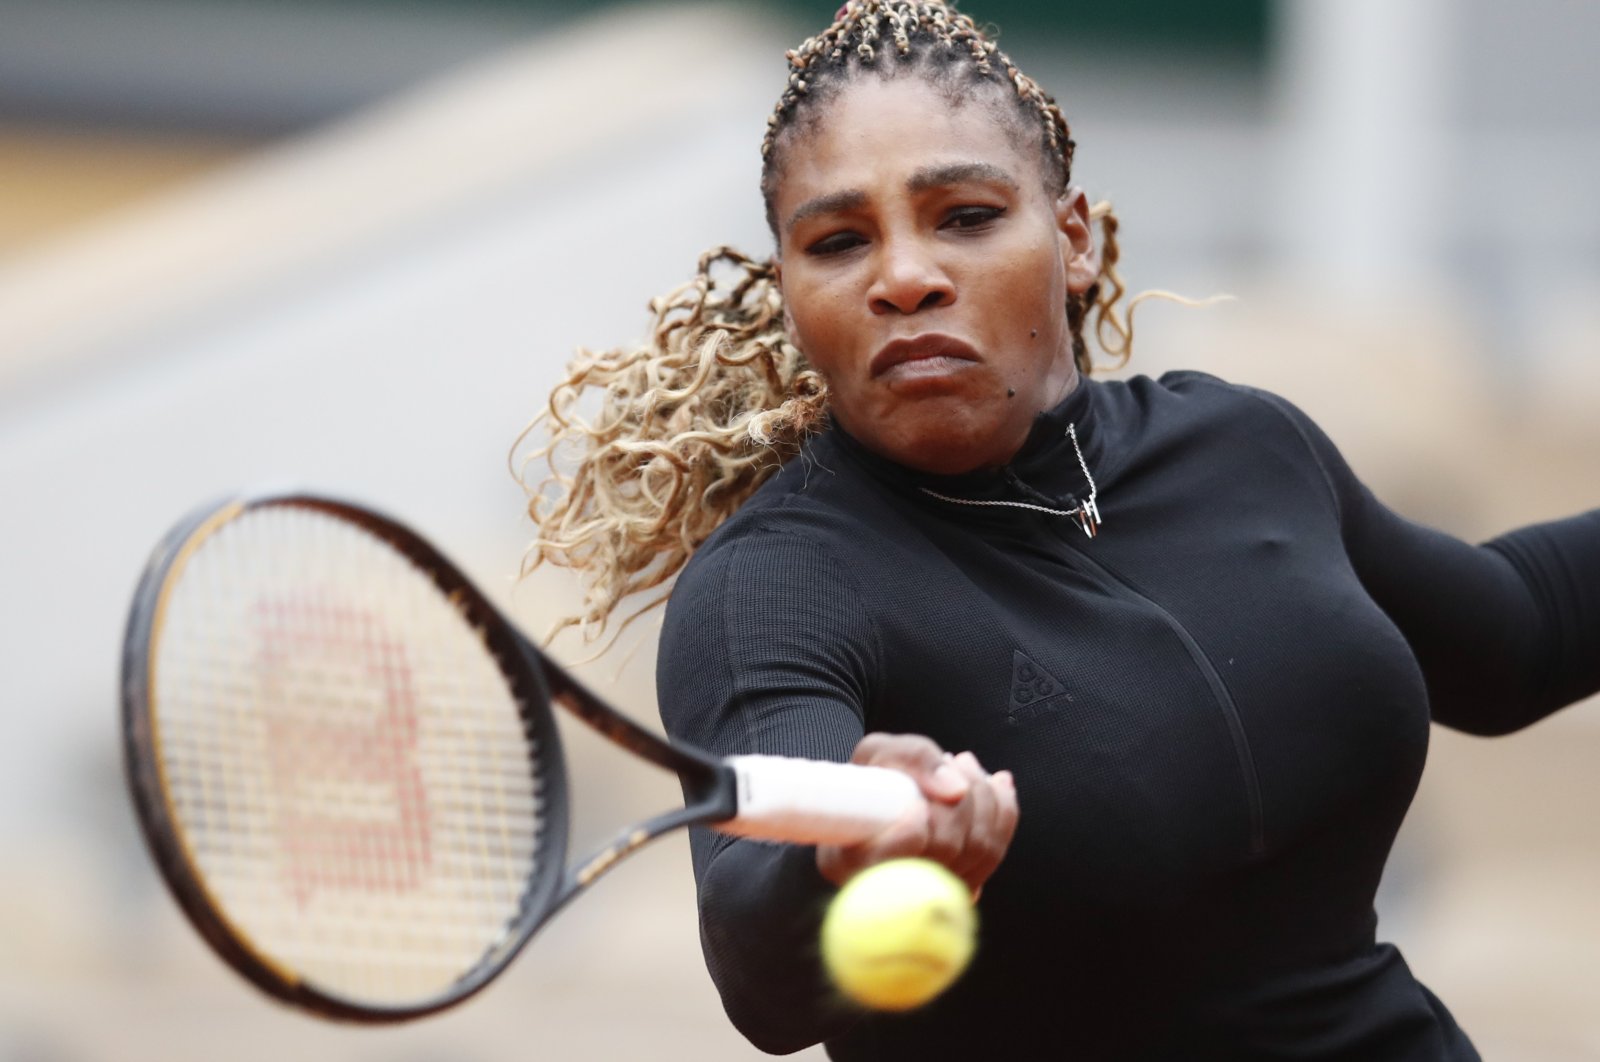 Serena Williams in action during a French Open match, in Paris, France, Sept. 28, 2020. (Reuters Photo)
